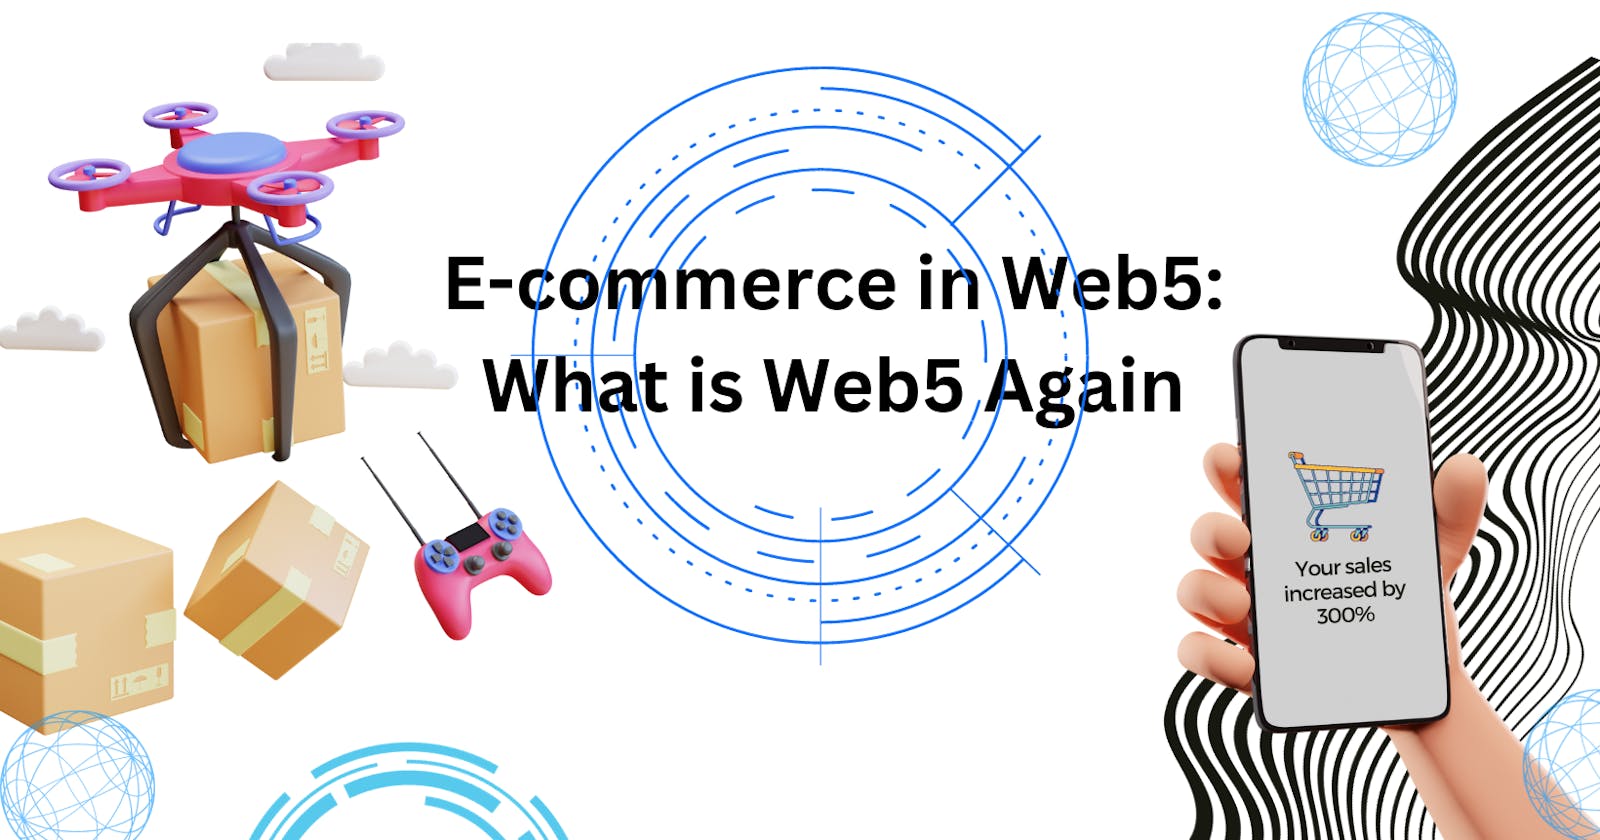 E-commerce in Web5: What is Web5 Again